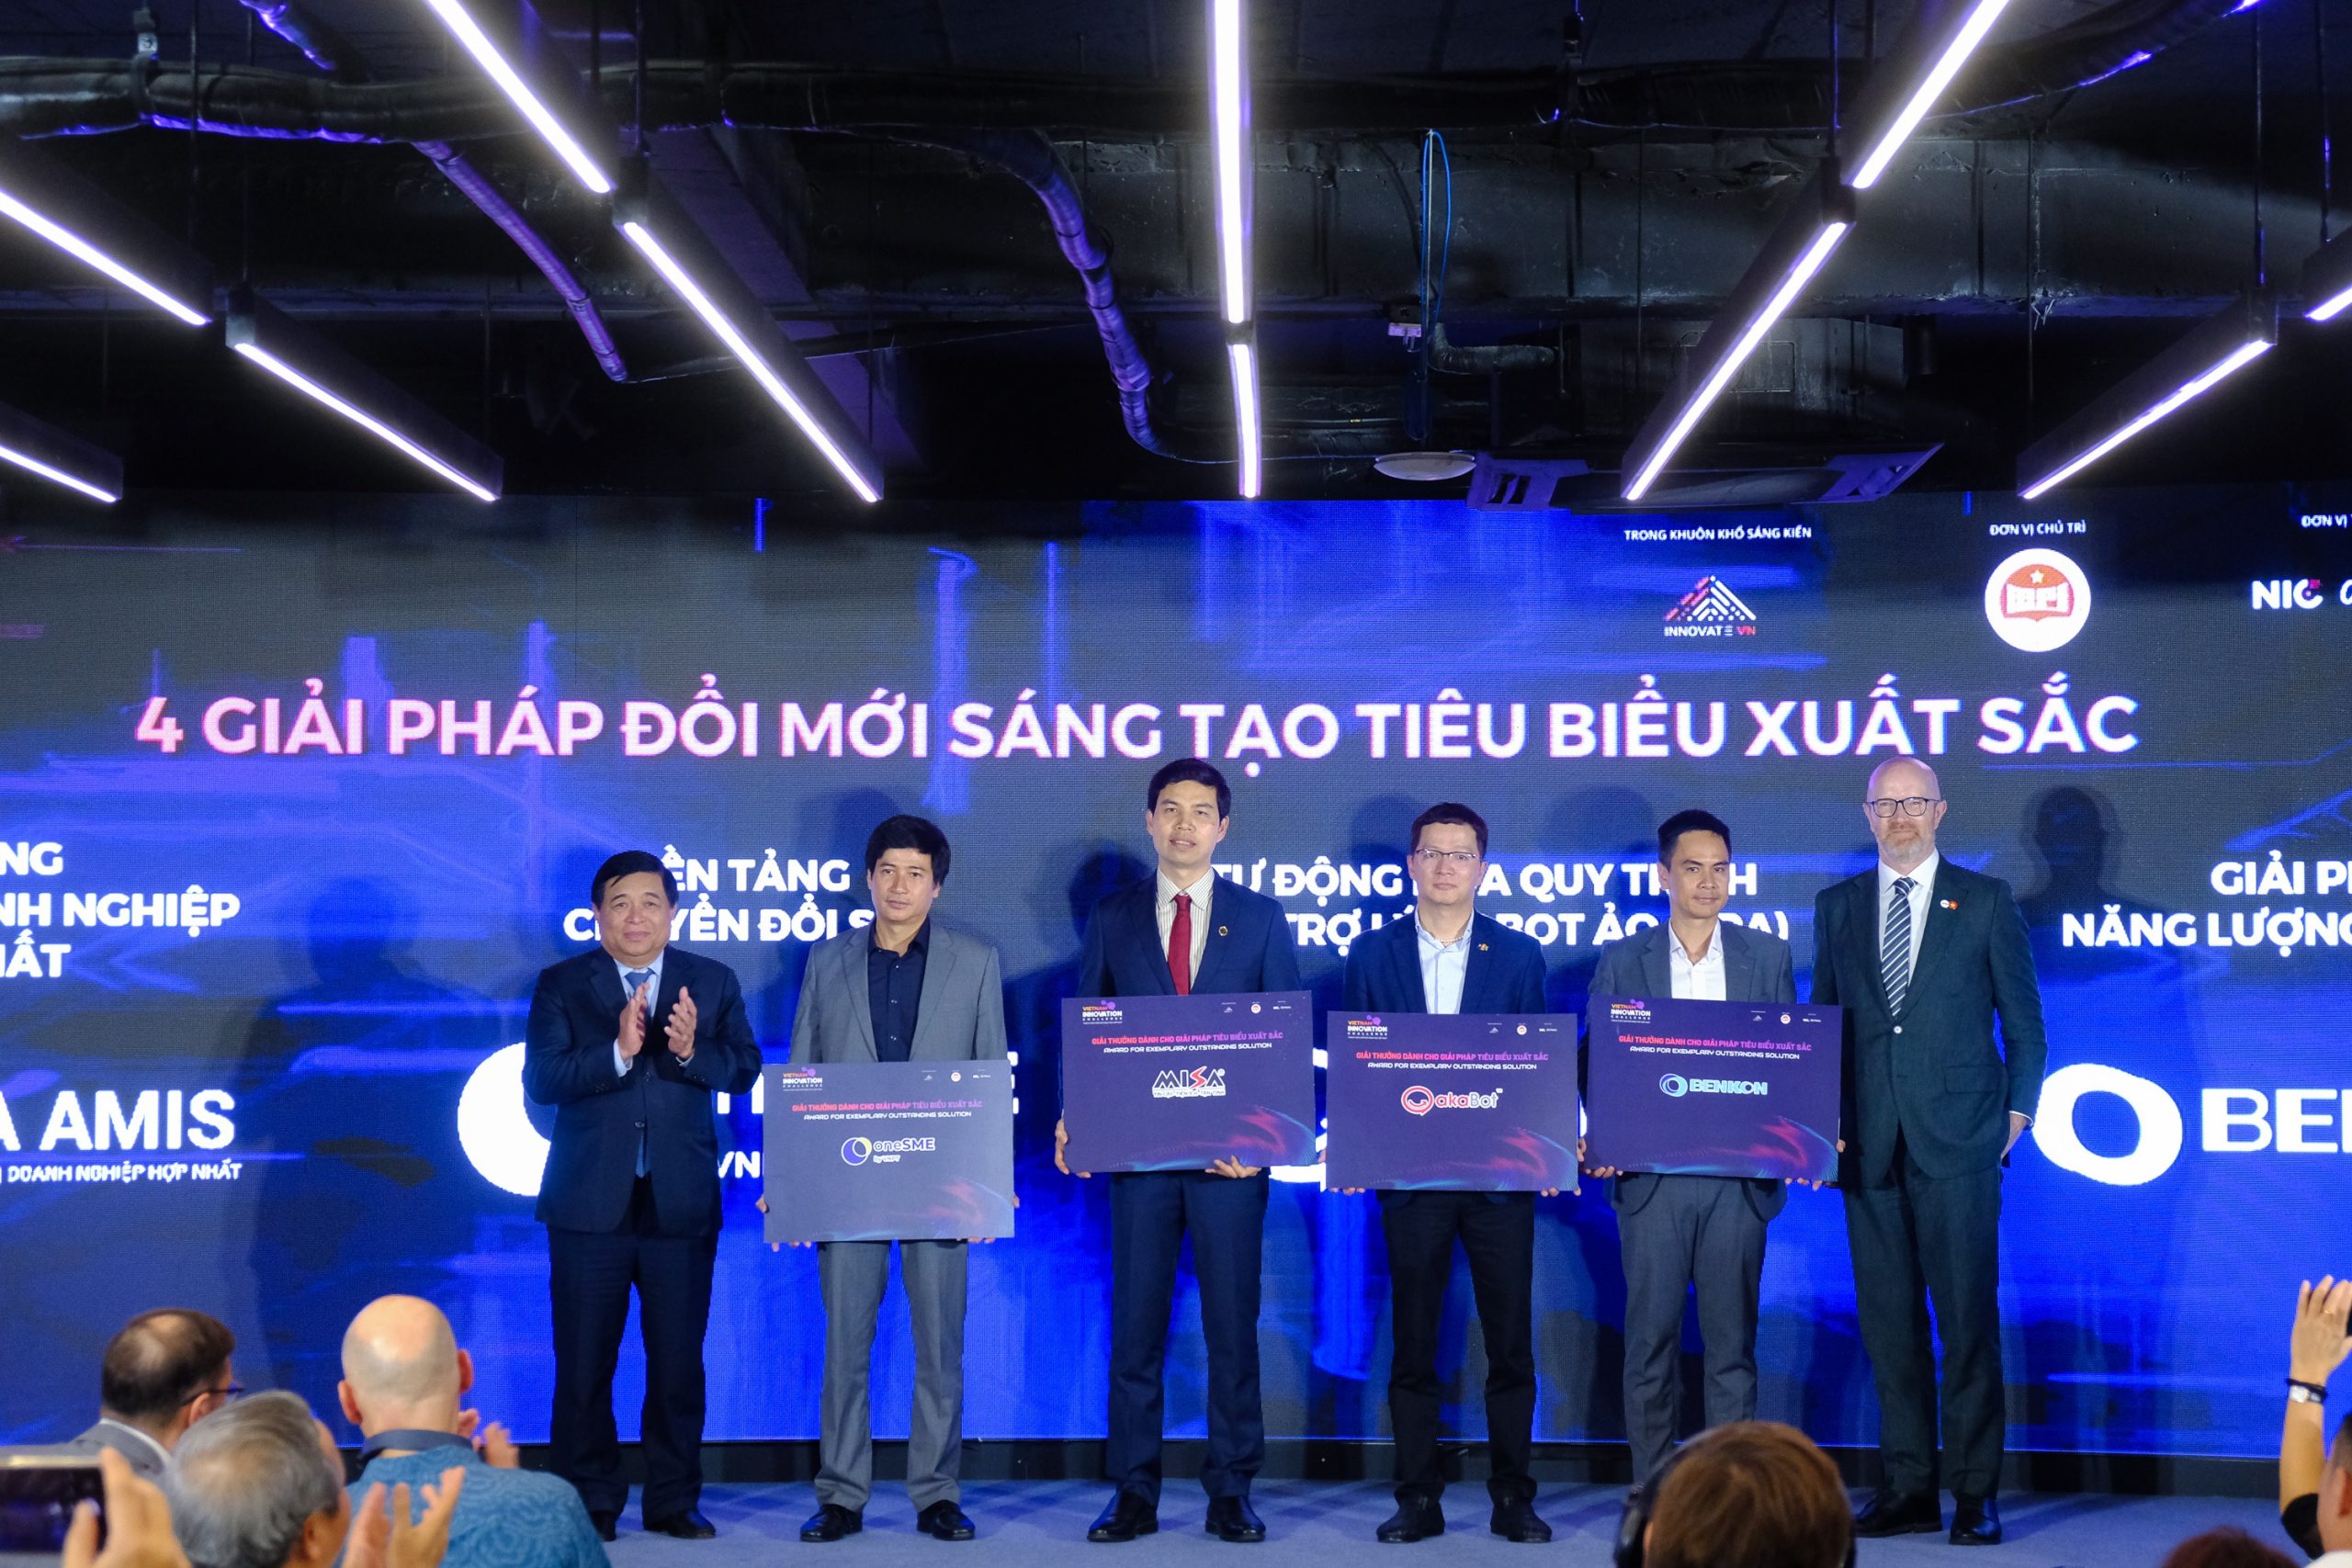 2023 Vietnam Innovation Challenge Program – Top 4 Exemplary Outstanding Solutions & Innovation Star Award – Robotic Process Automation (RPA) Solution (akaBot)